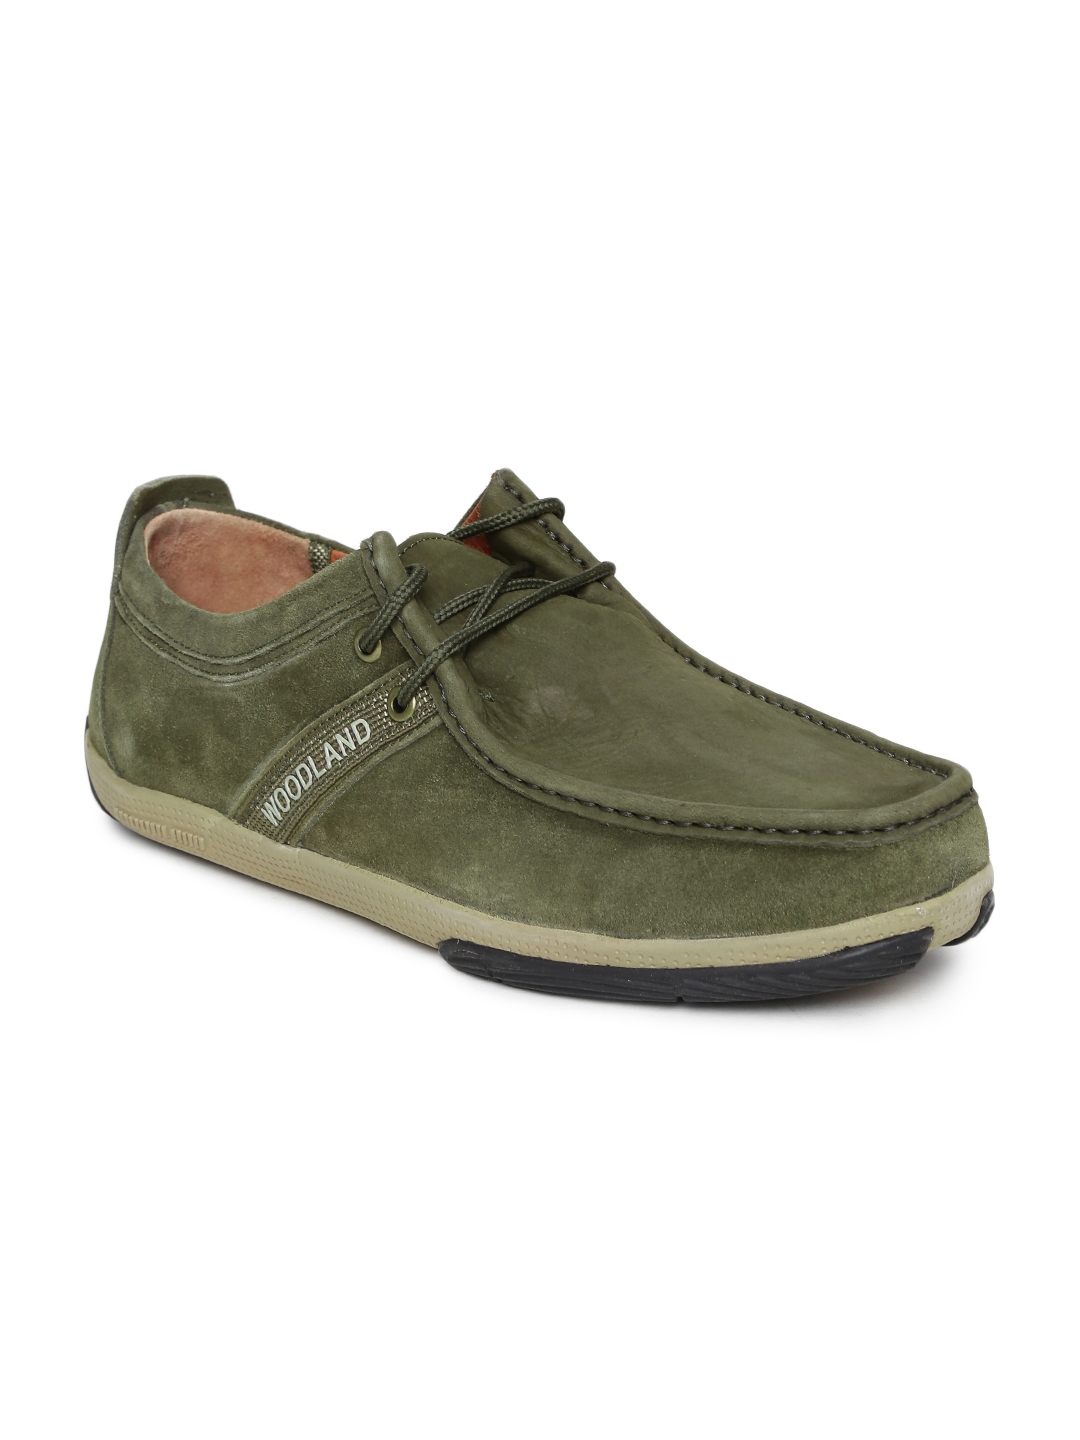 woodland men's casual shoes